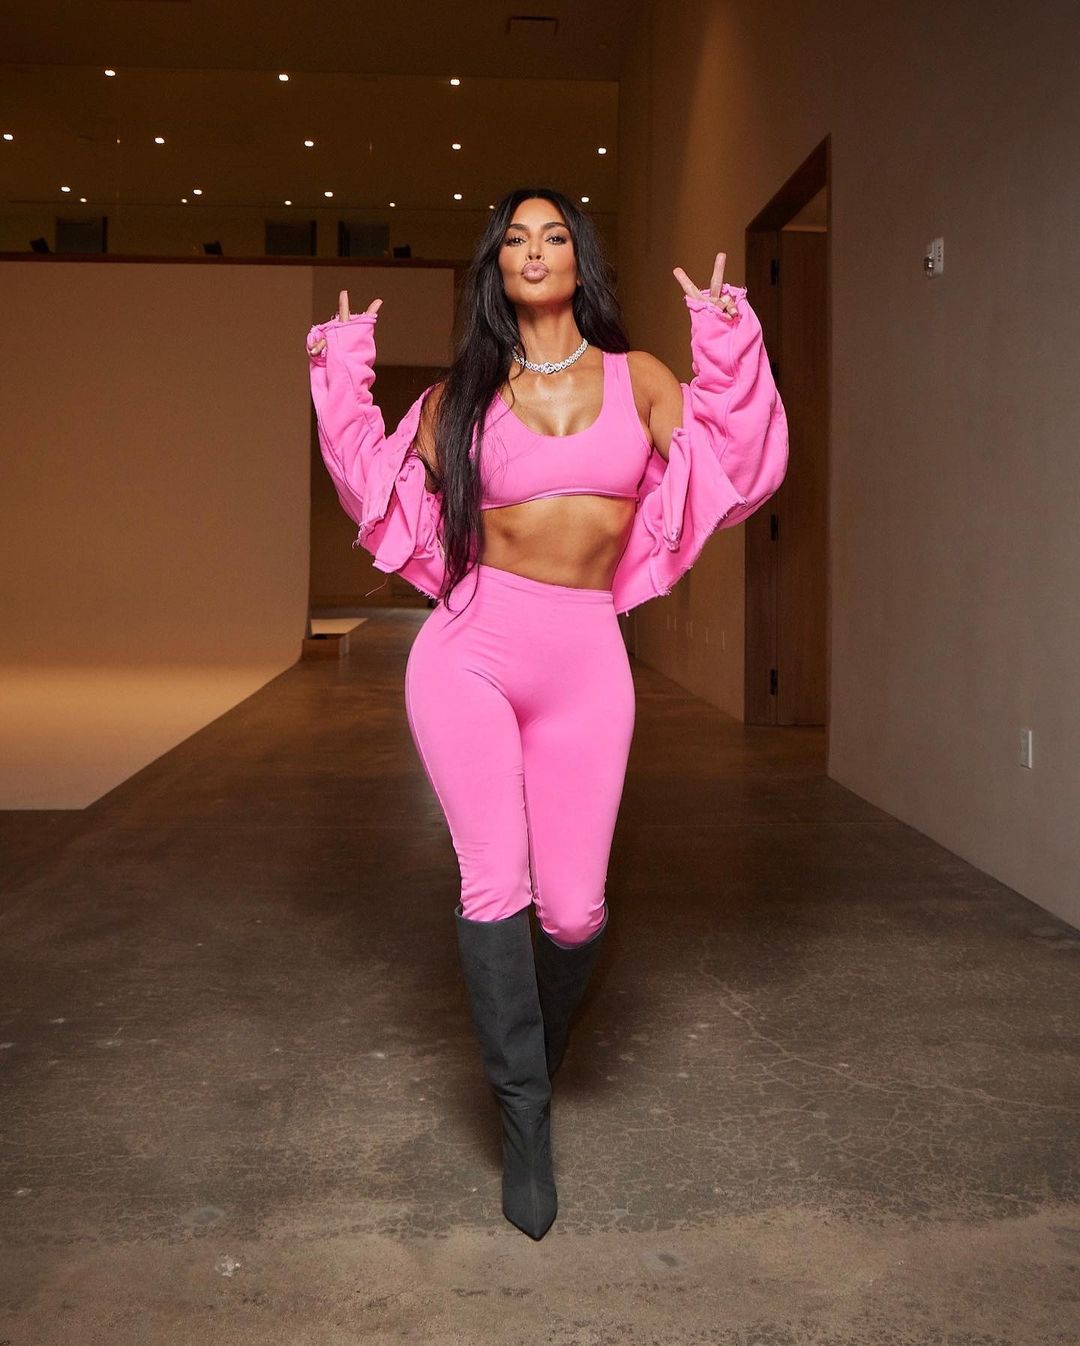 Kim Kardashian in GREG ROSS Pink Color Outfit snaps, Feb 2023